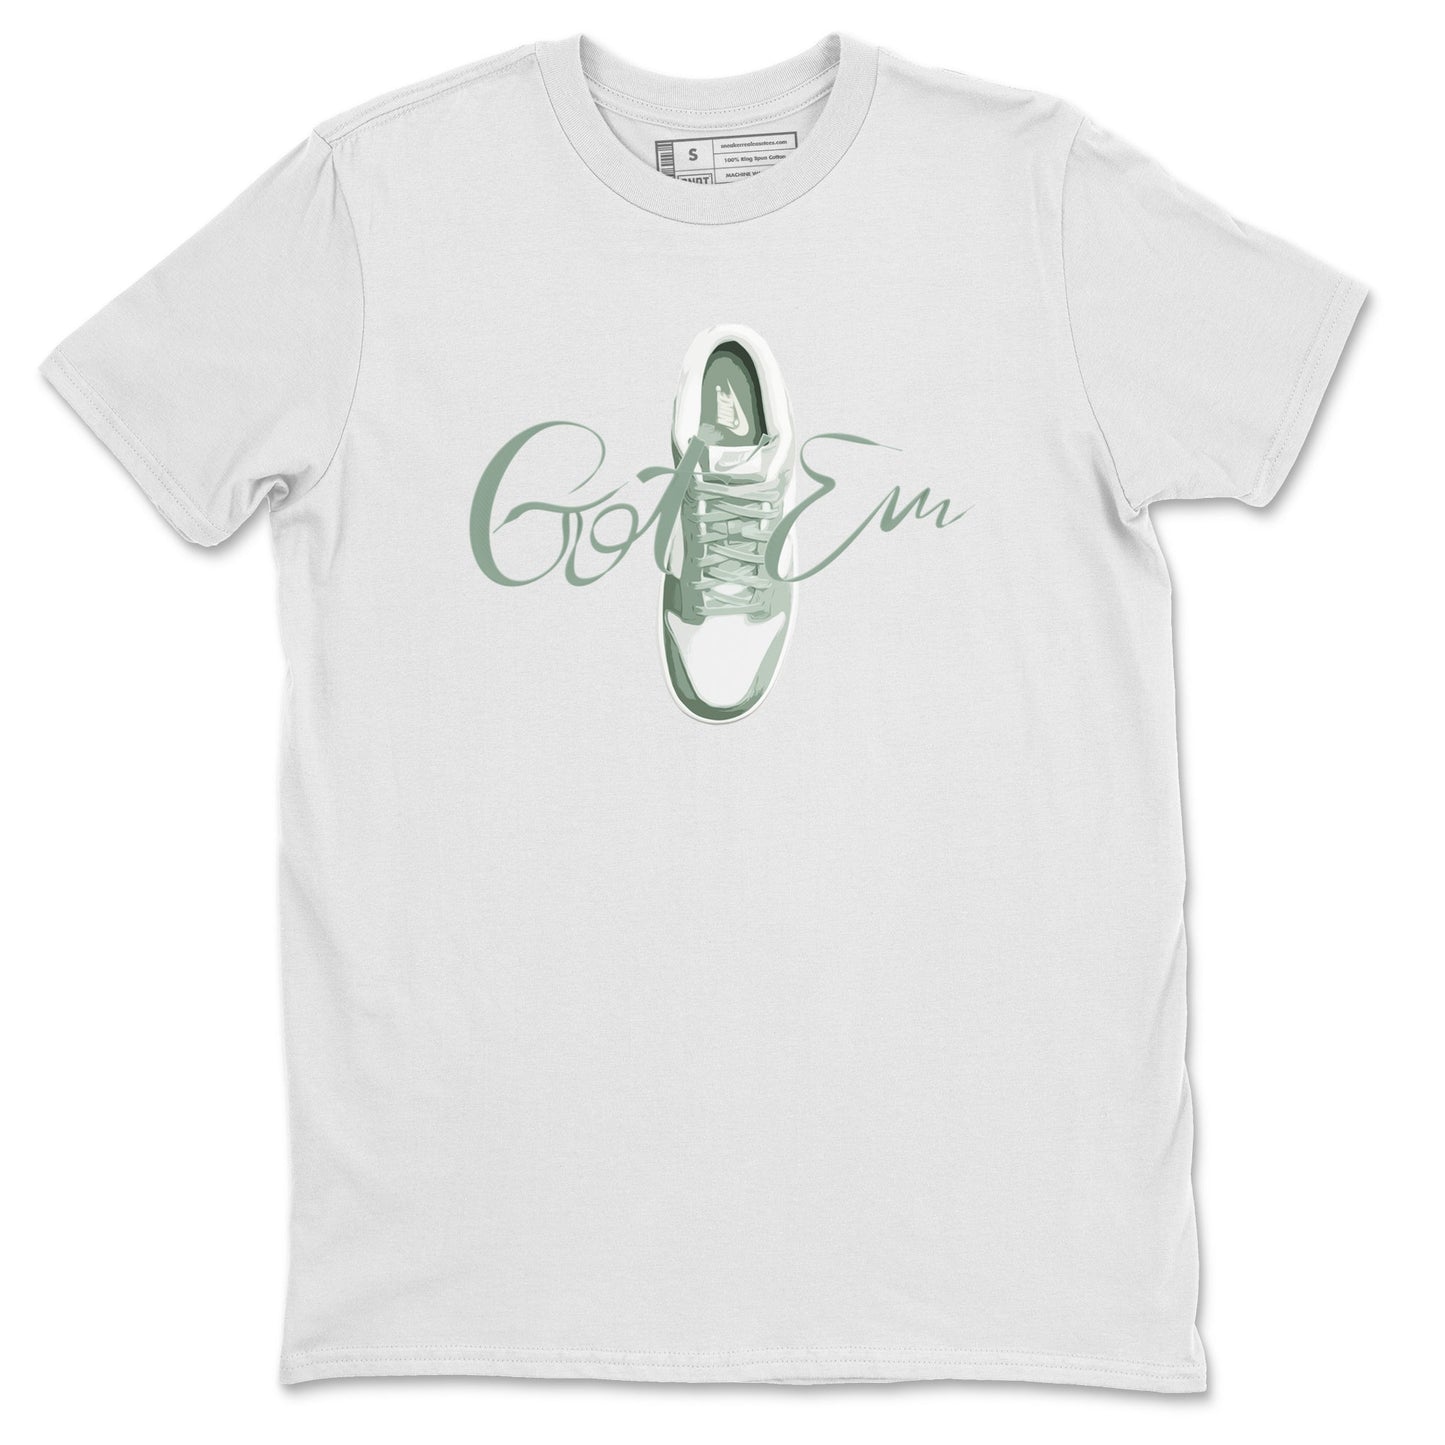 Dunk Mica Green Sneaker Match Tees Caligraphy Shoe Lace Sneaker Tees Dunk Low Mica Green Sneaker Release Tees Unisex Shirts White 2